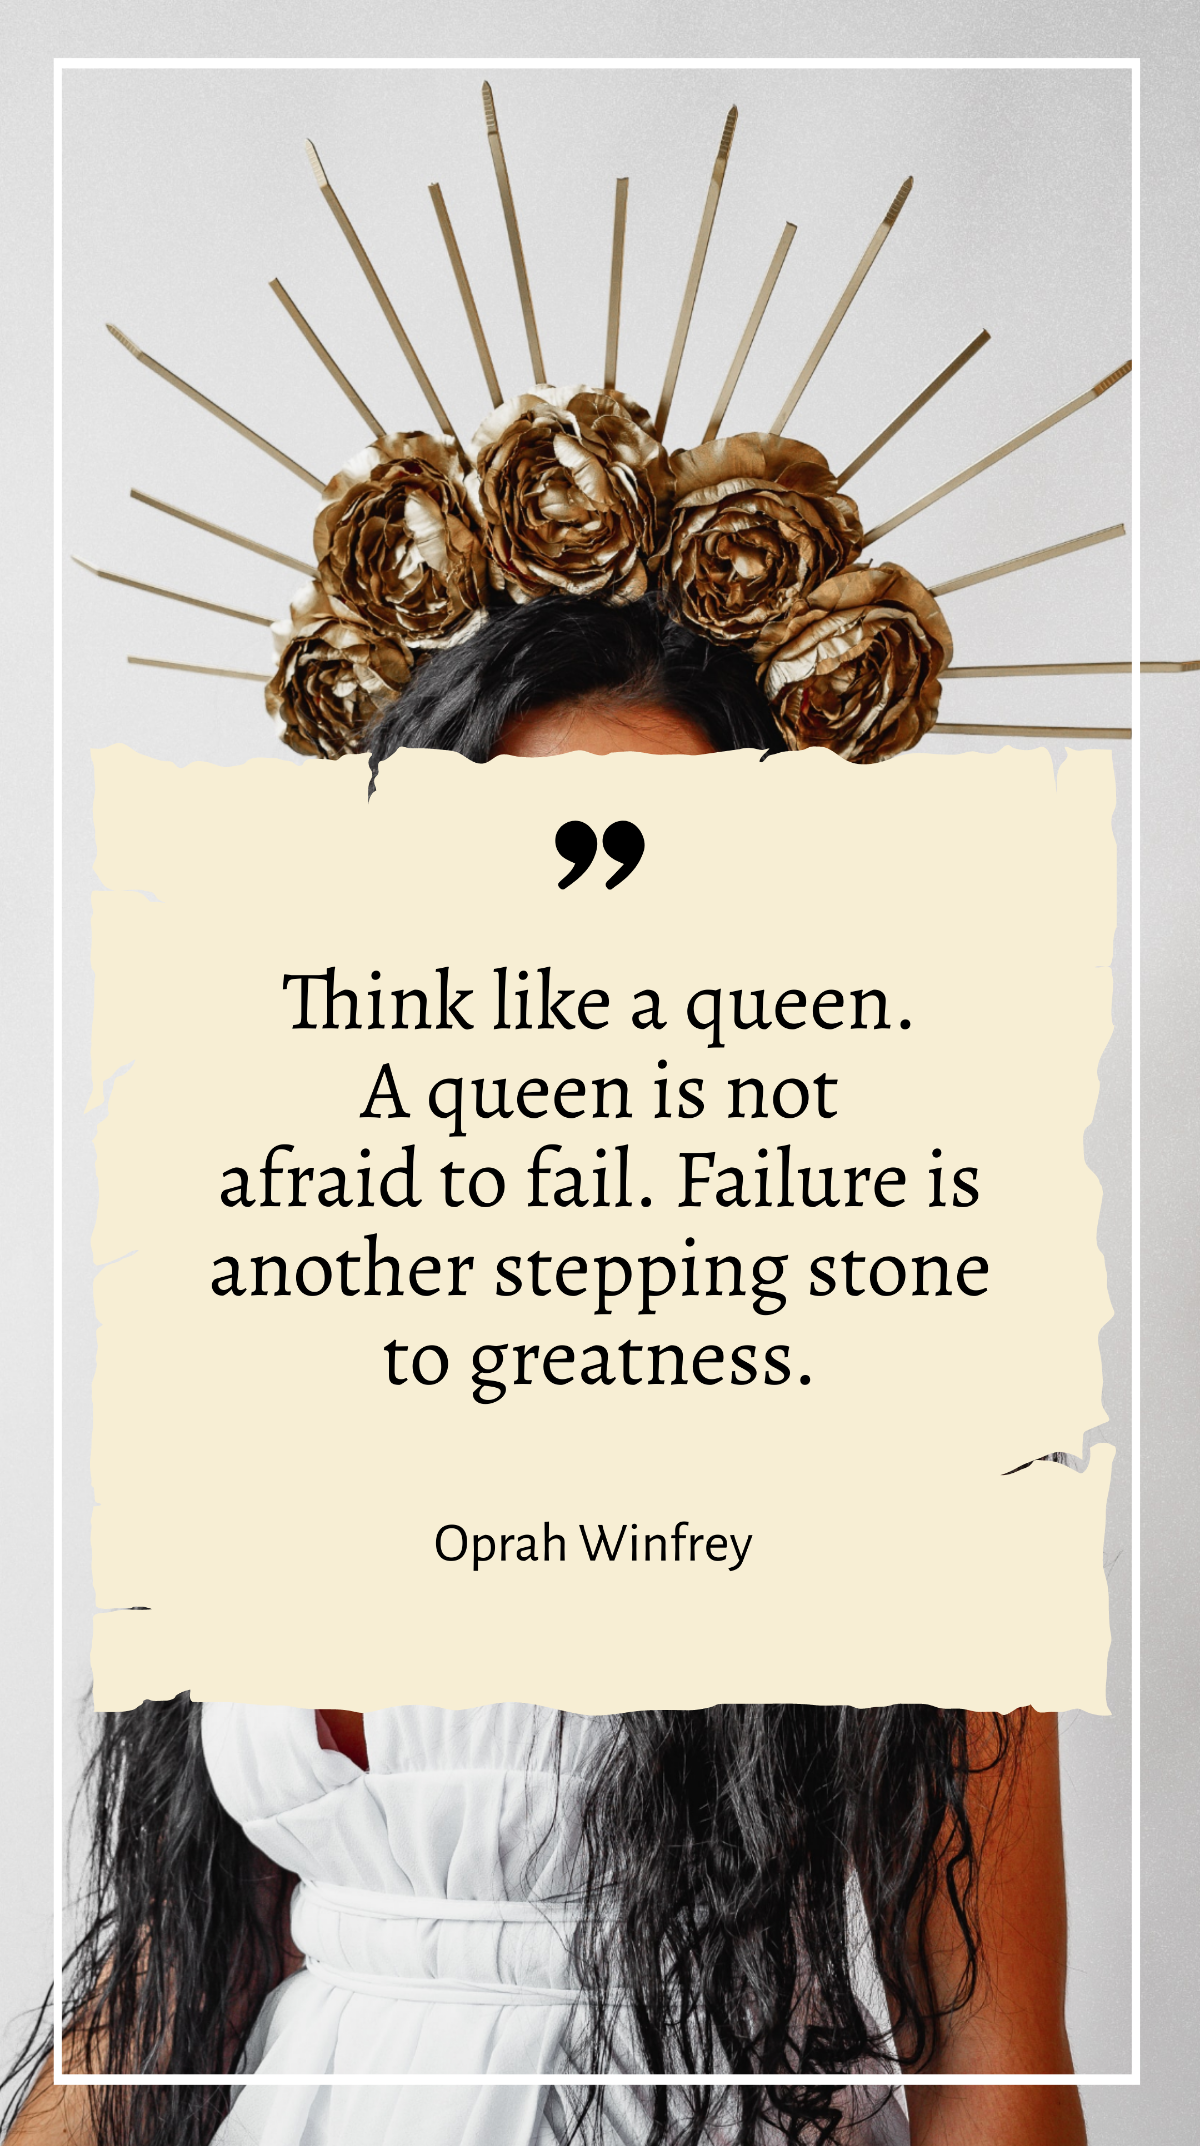 Oprah Winfrey - Think like a queen. A queen is not afraid to fail. Failure is another stepping stone to greatness. Template